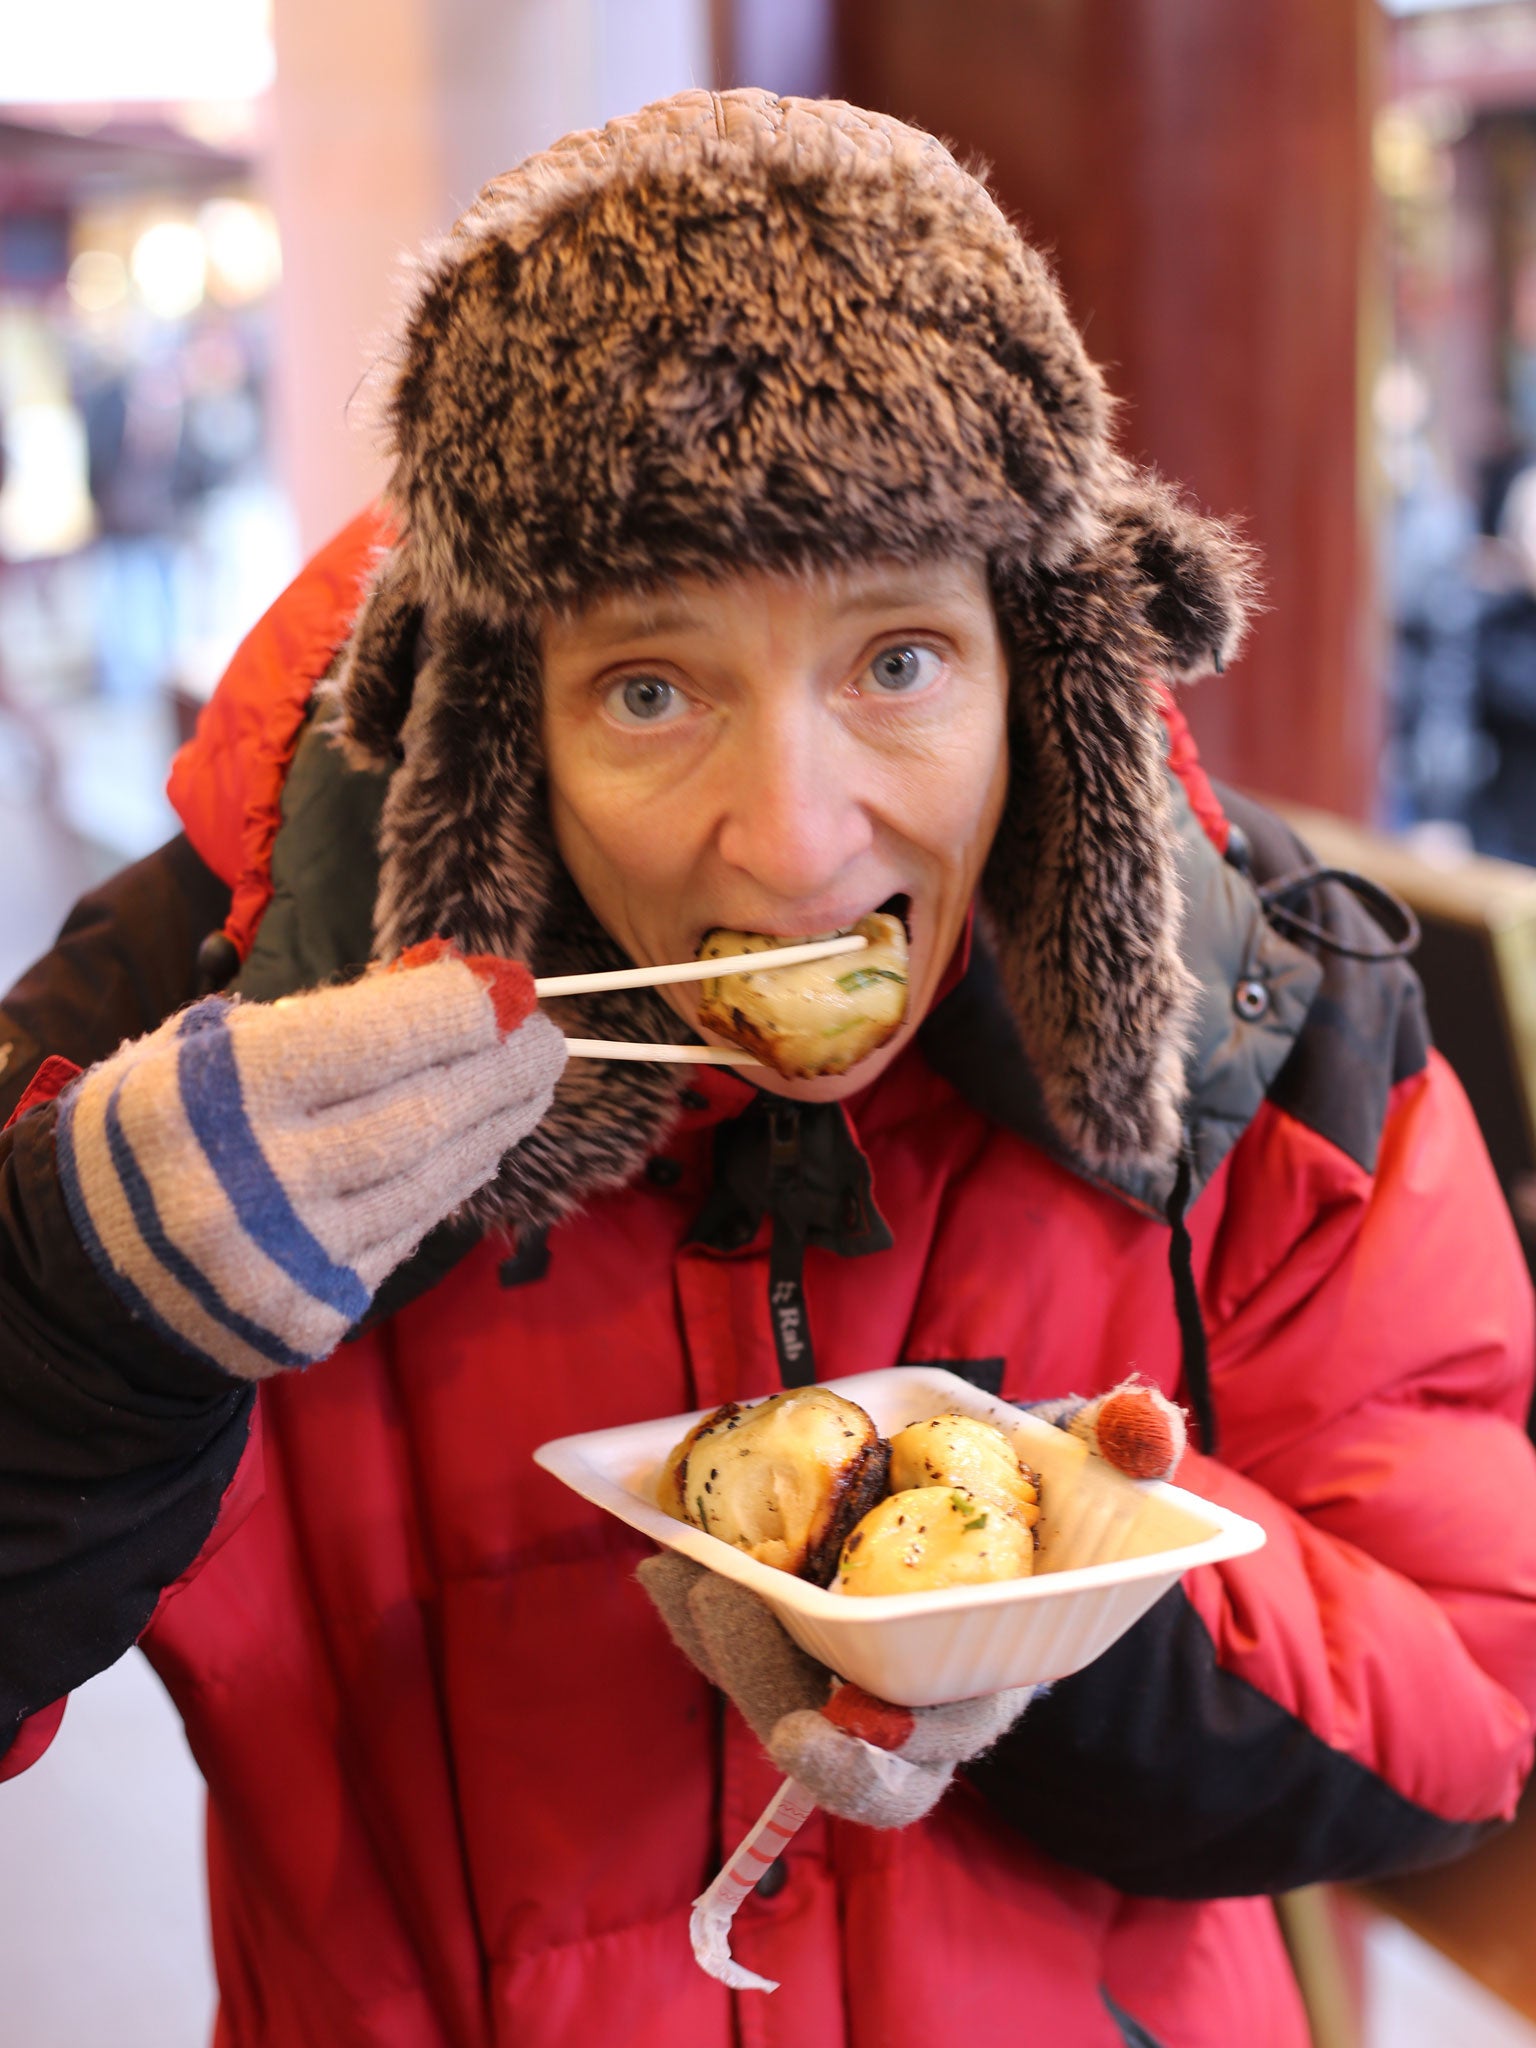 Cathy trying some street food in Shanghai, China